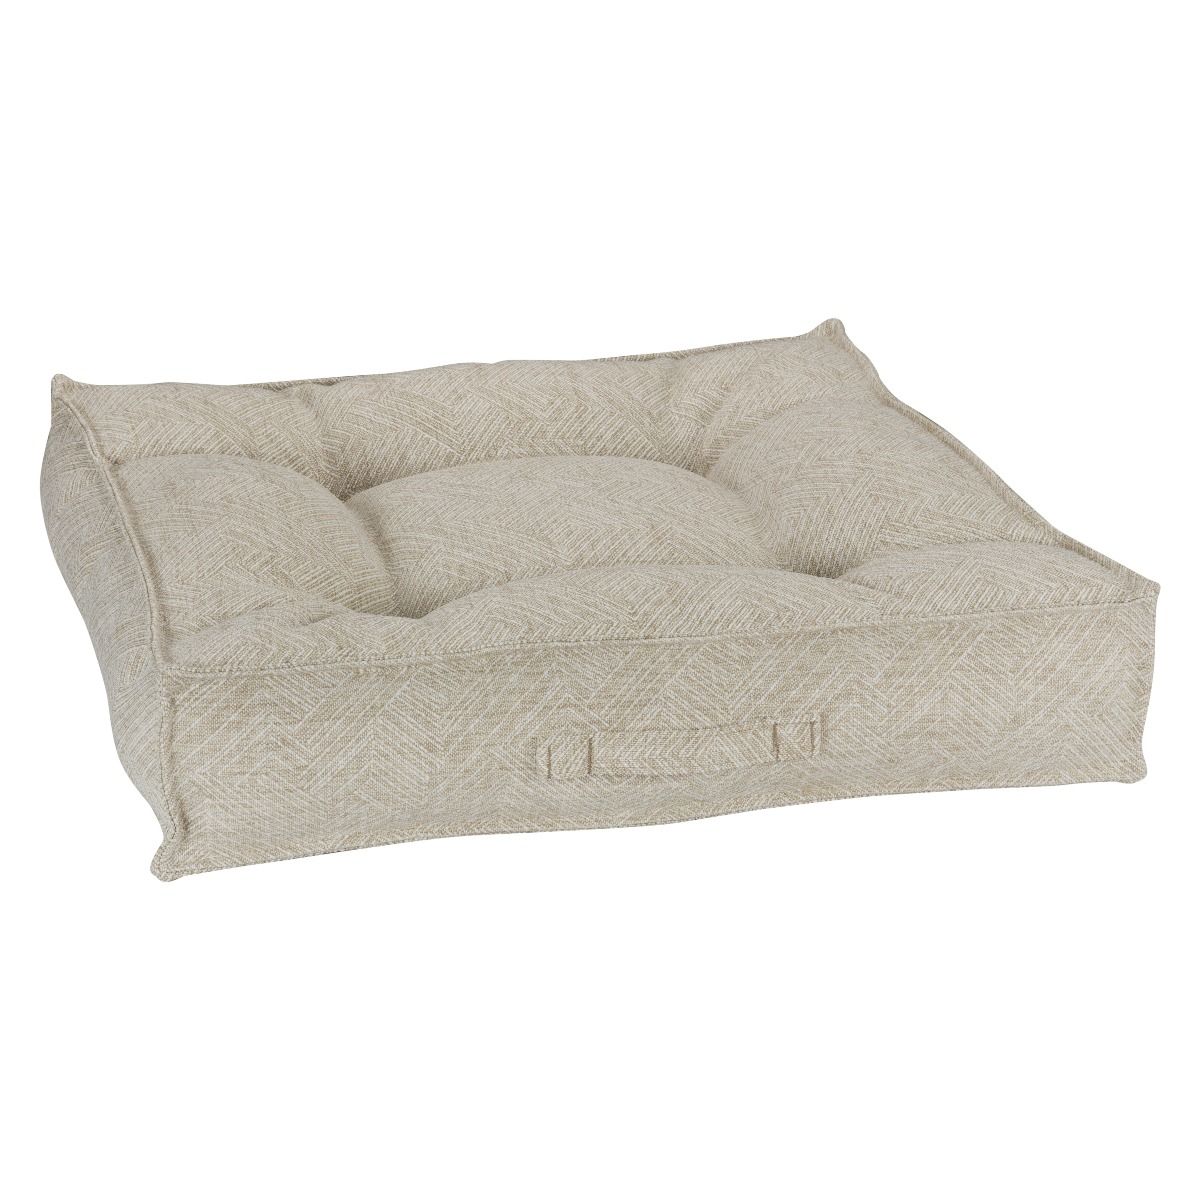 Pet Boutique - Dog Bed - Piazza Bed: Natura